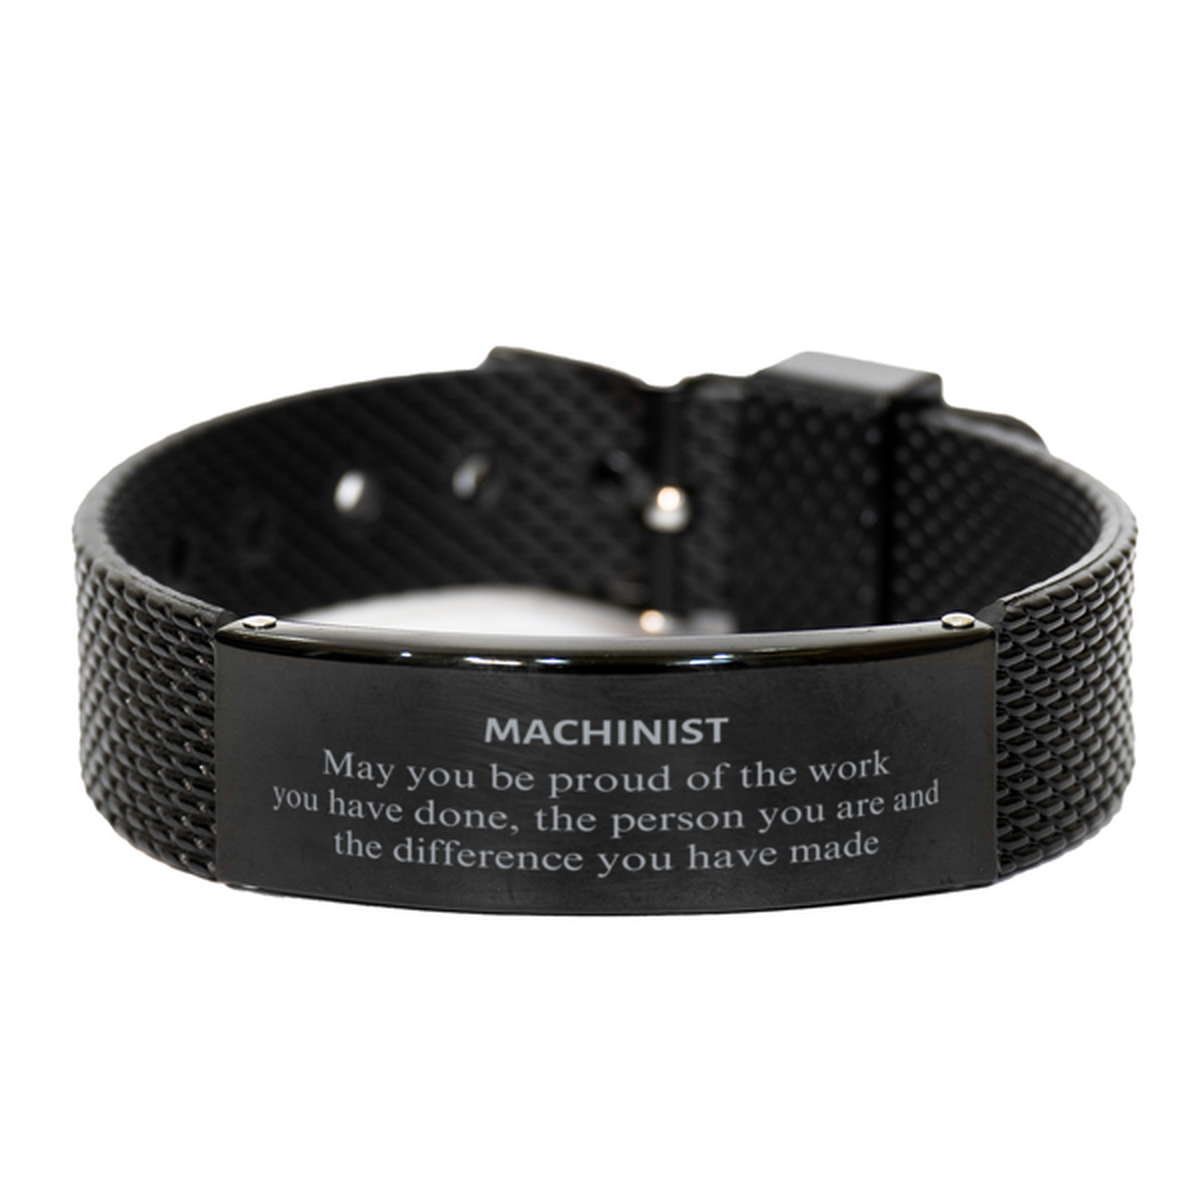 Machinist May you be proud of the work you have done, Retirement Machinist Black Shark Mesh Bracelet for Colleague Appreciation Gifts Amazing for Machinist